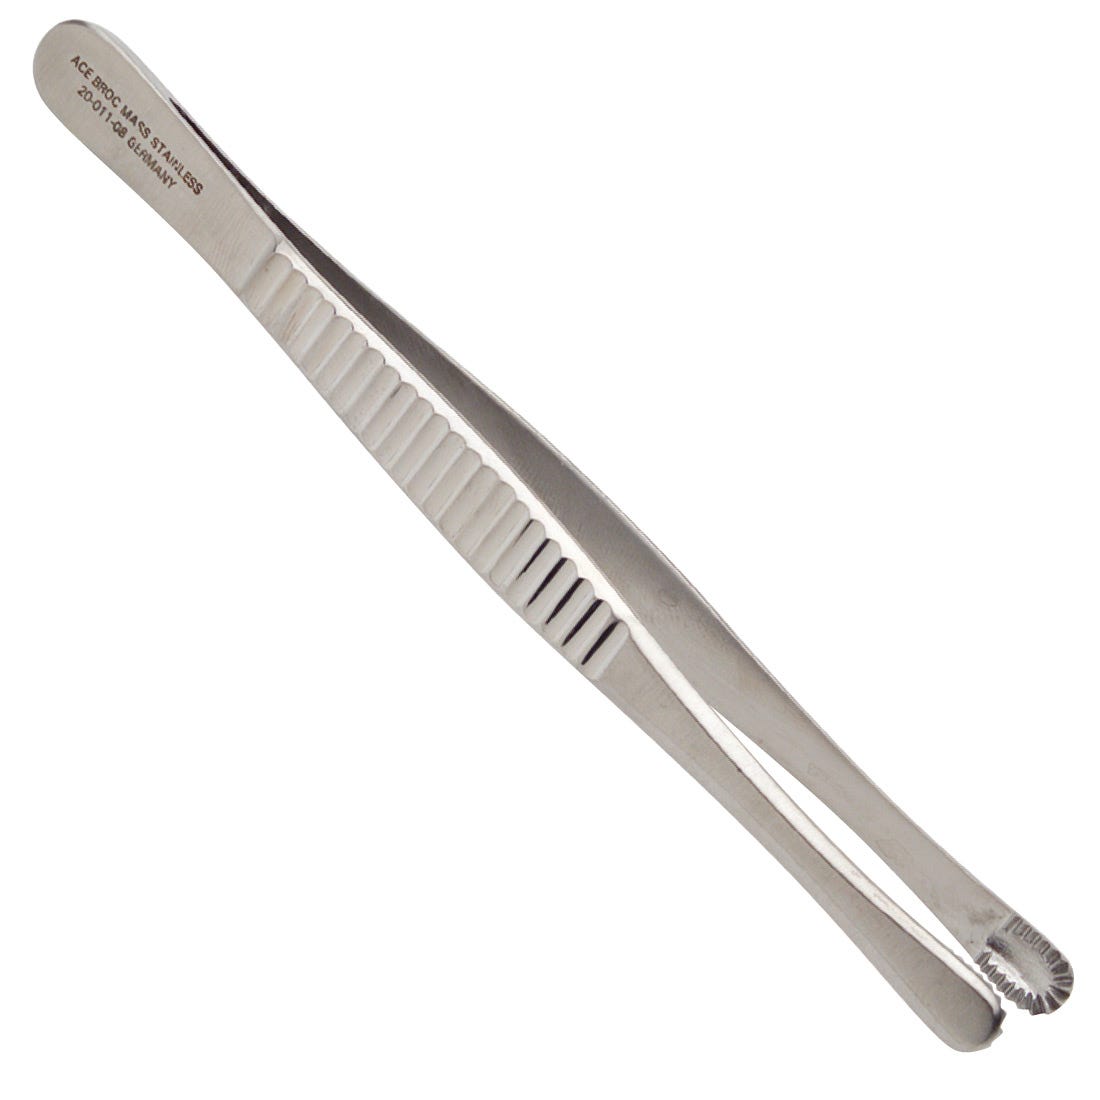 ACE Russian Tissue Forceps, 6", 15cm